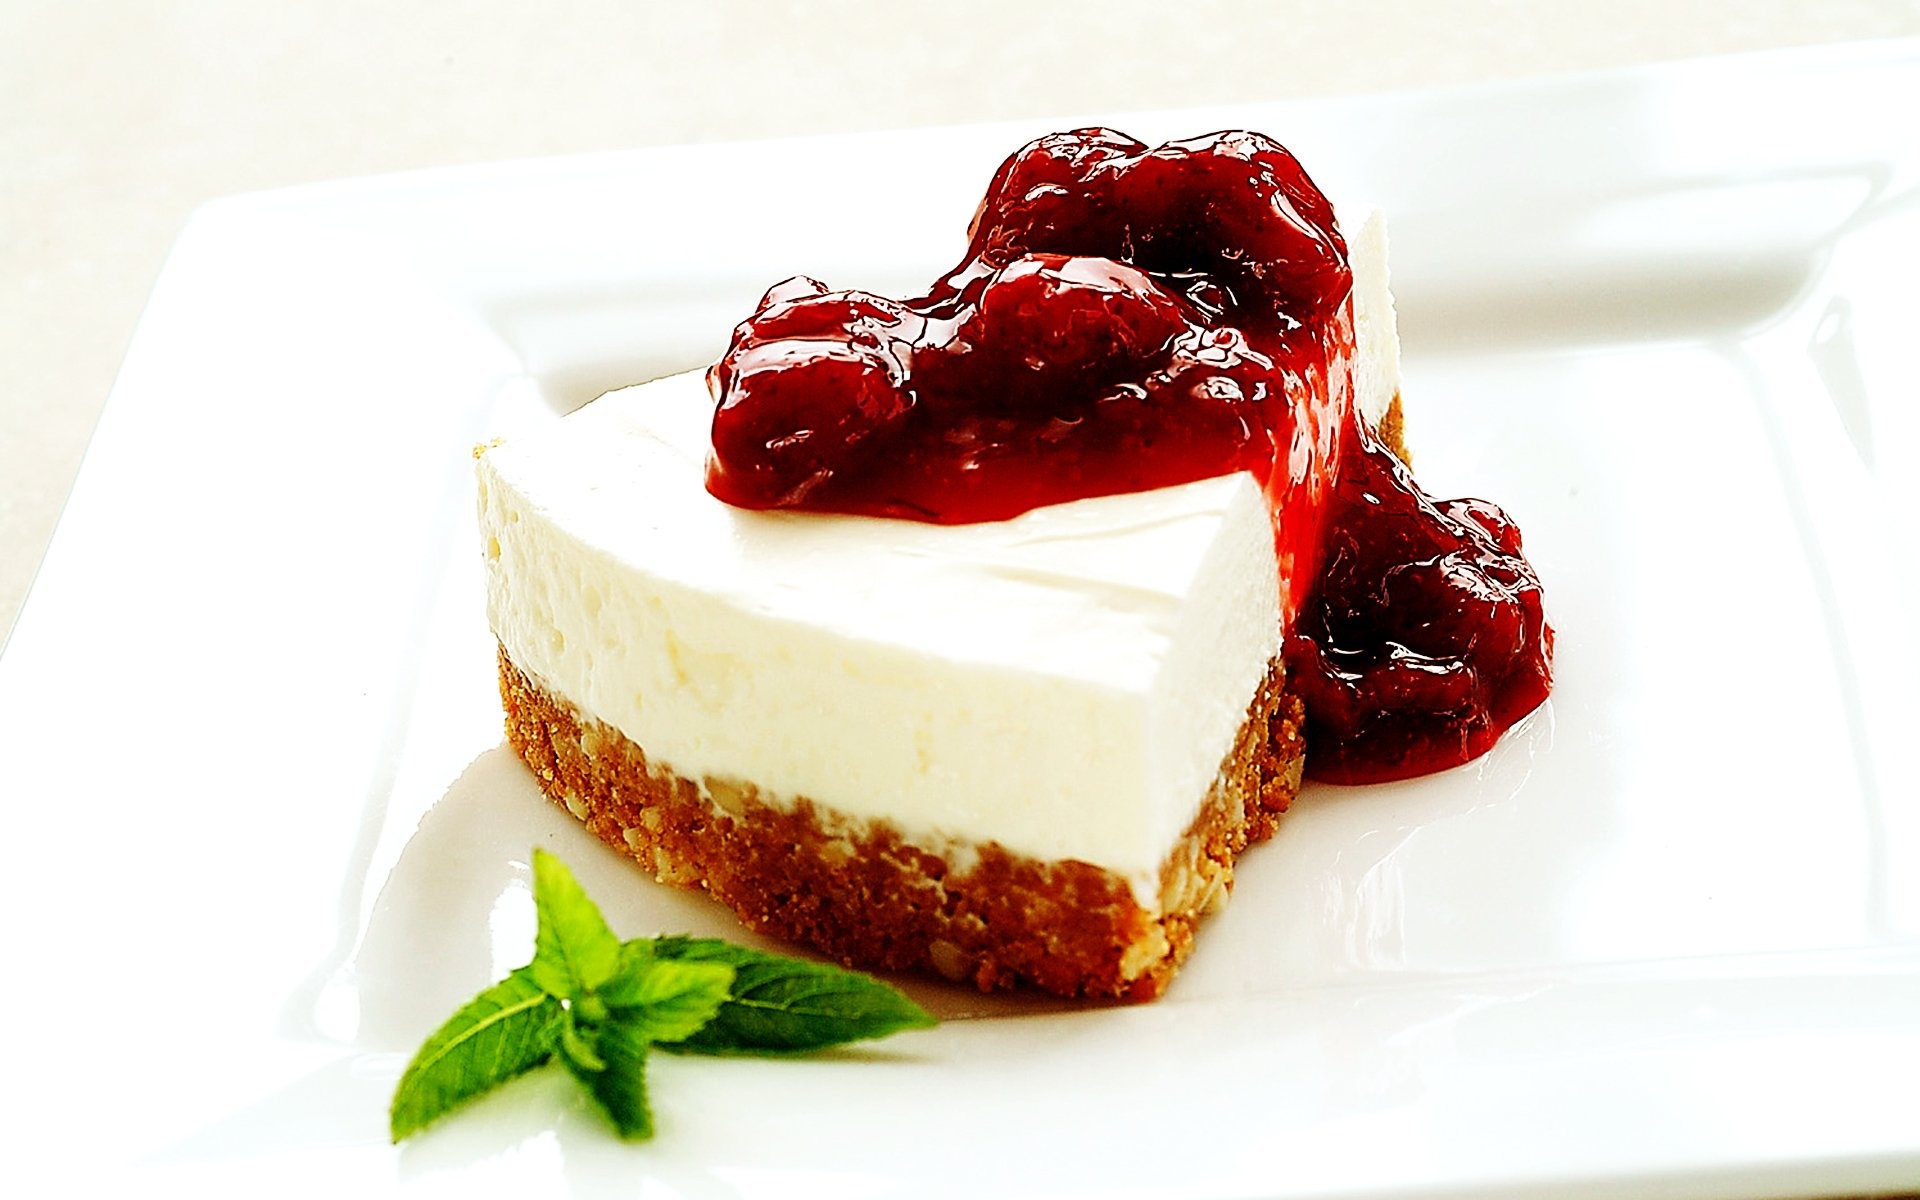 Cheesecake: A finely ground and crunchy crust combined with luscious and smooth cream cheese. 1920x1200 HD Wallpaper.